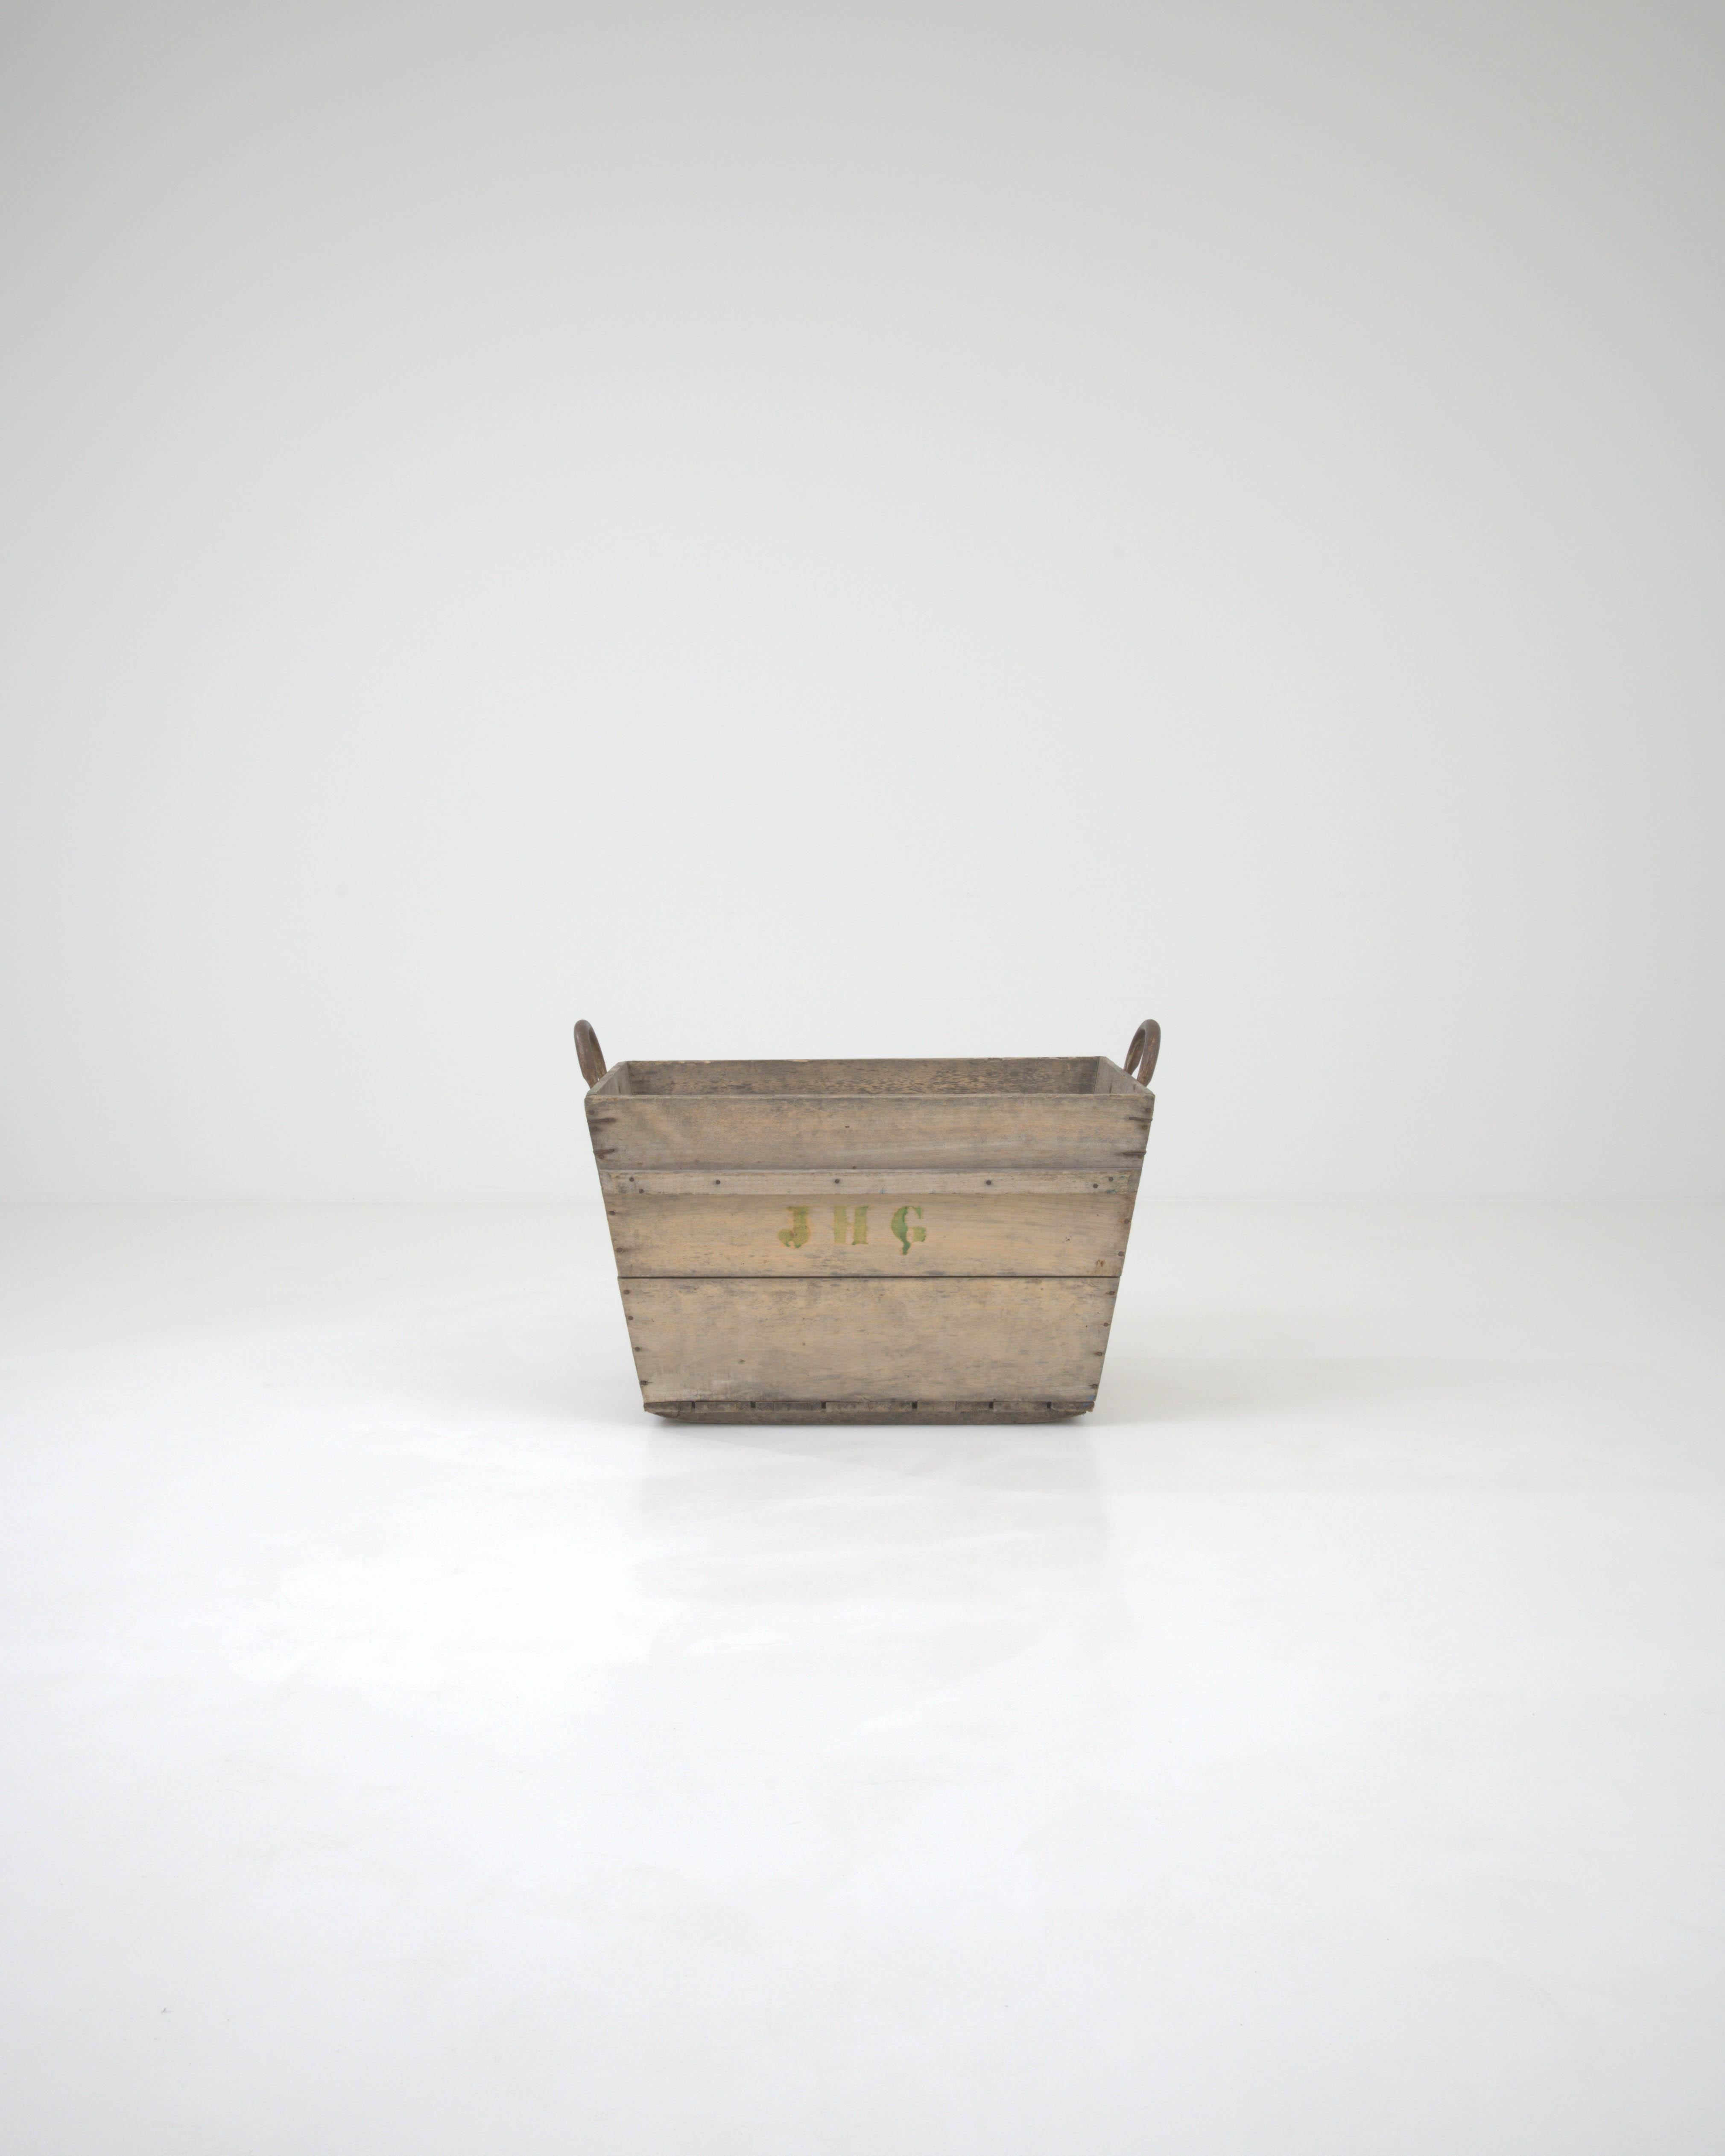 Step into the rustic charm of the French countryside with this authentic Early 20th Century French Wooden Grape Crate. Crafted from solid wood that has aged gracefully, this piece carries with it the spirit of a bygone era of vineyard harvests and